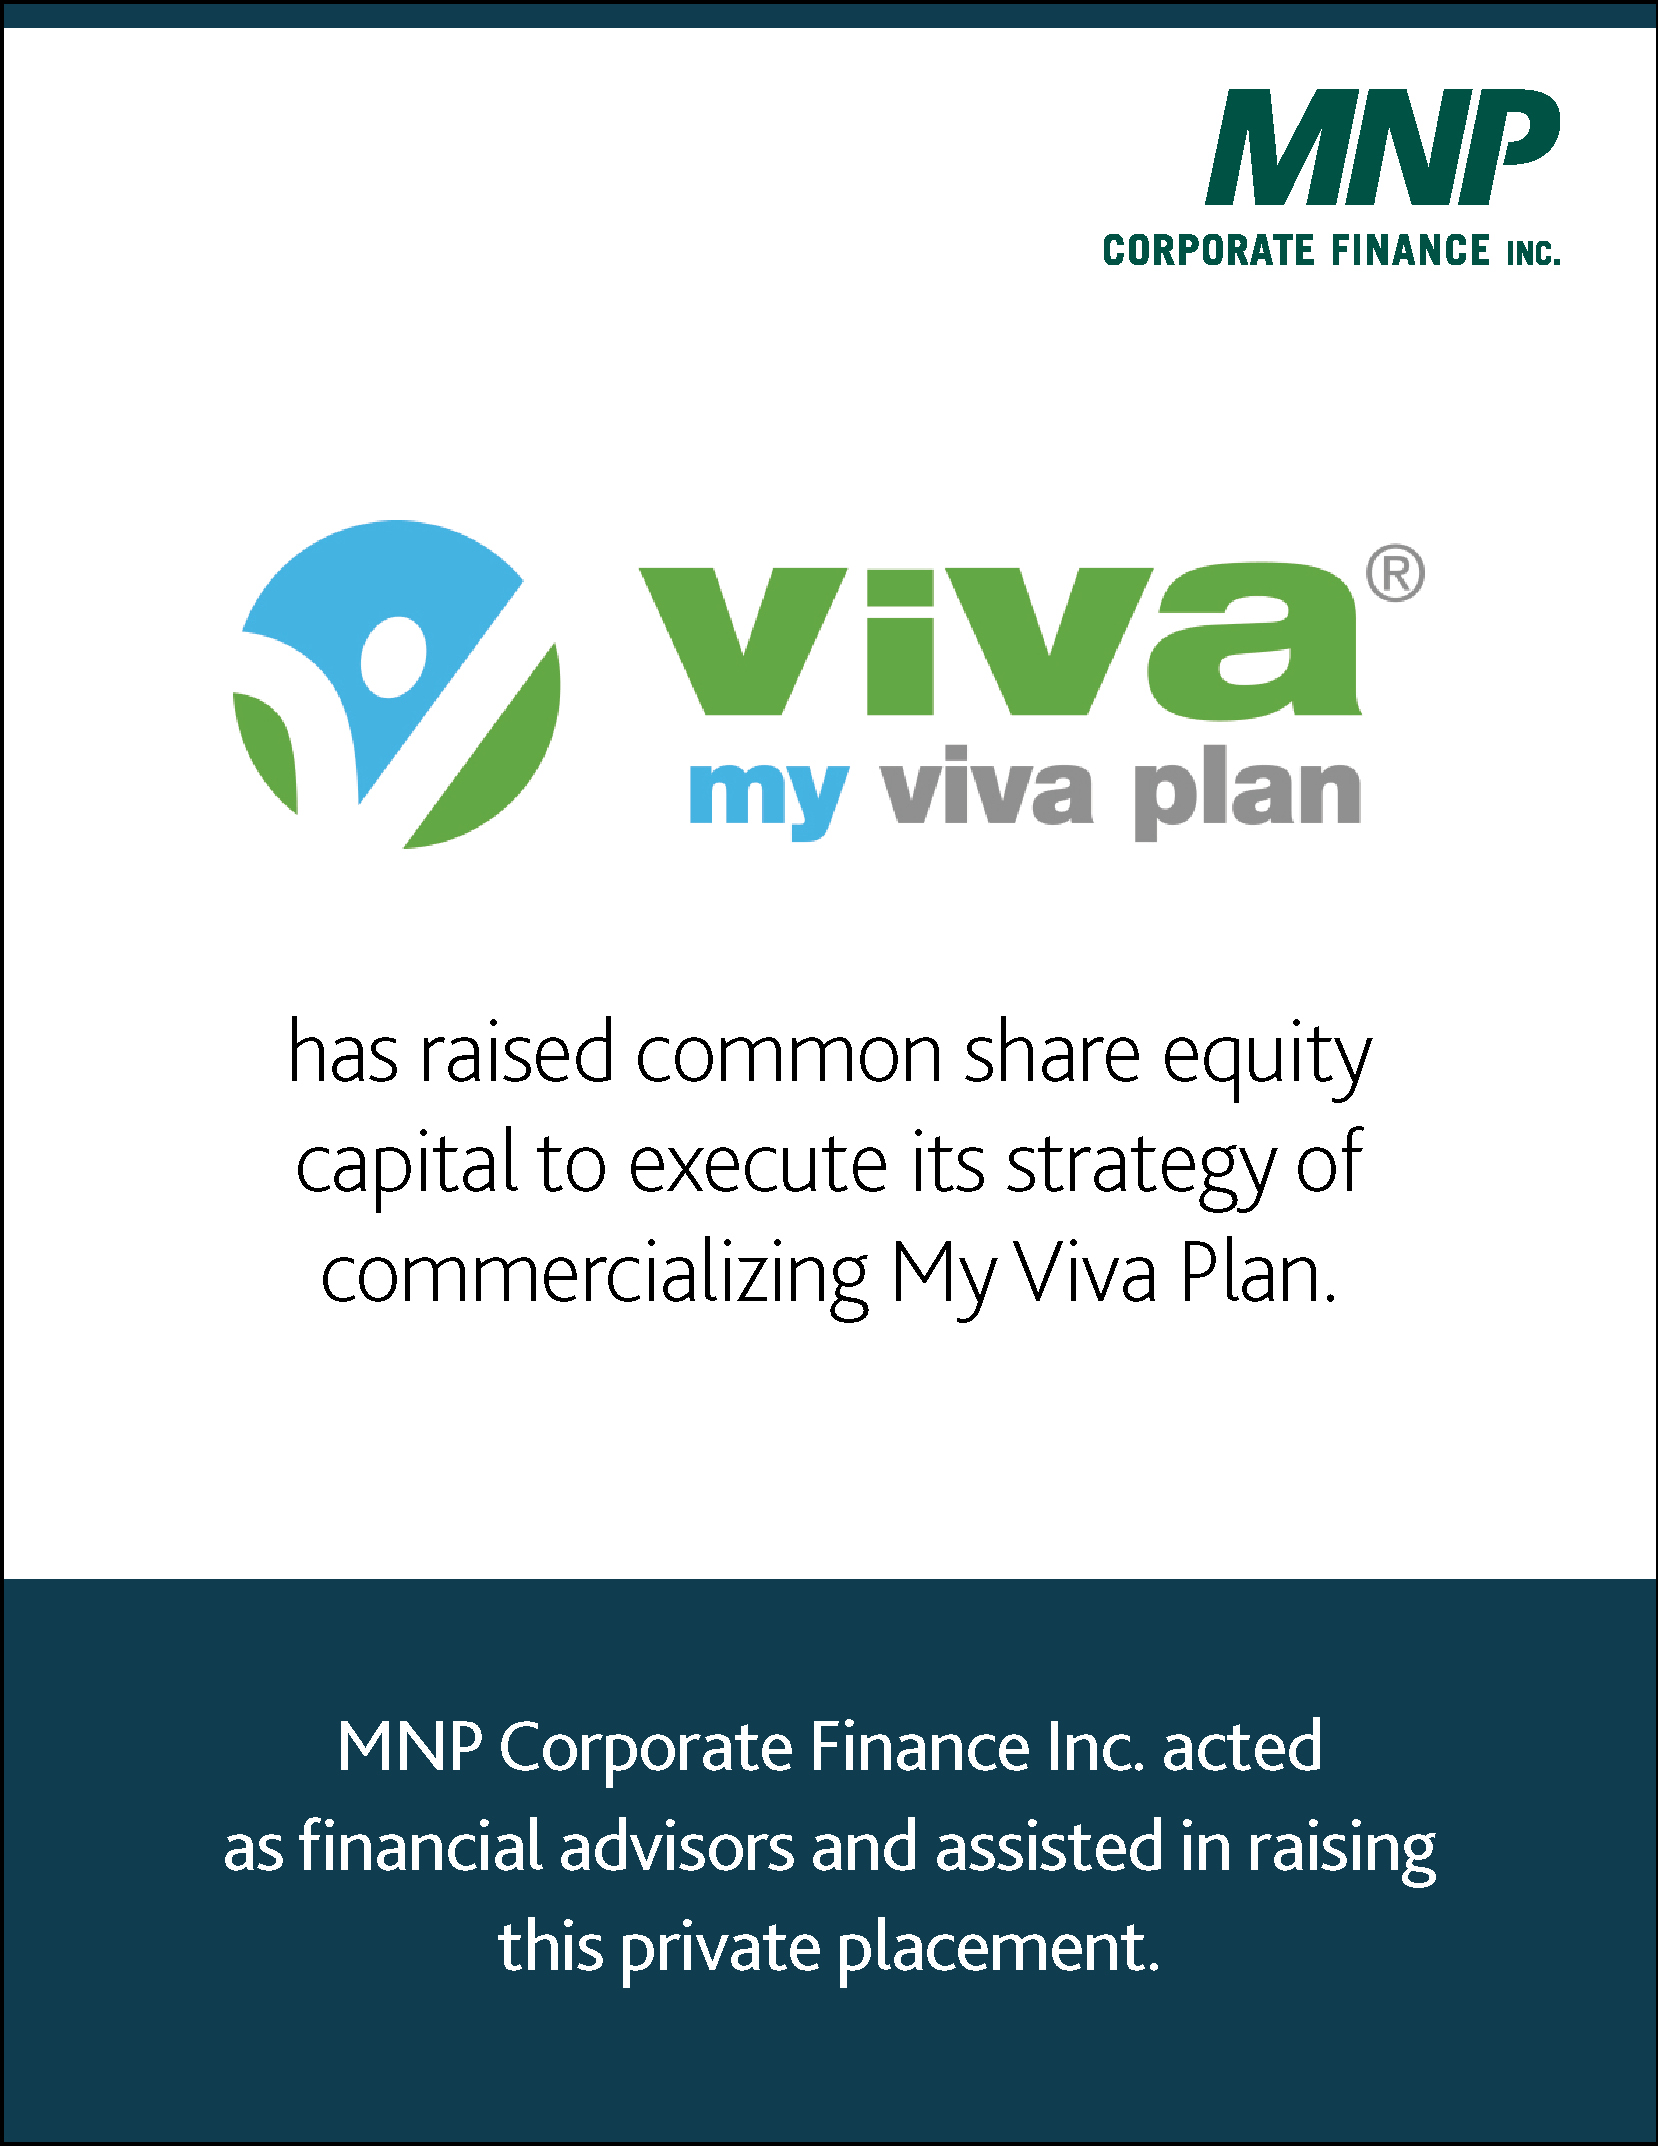 Viva my viva plan has raised common share equity capital to execute its strategy of commercializing My Viva Plan. 